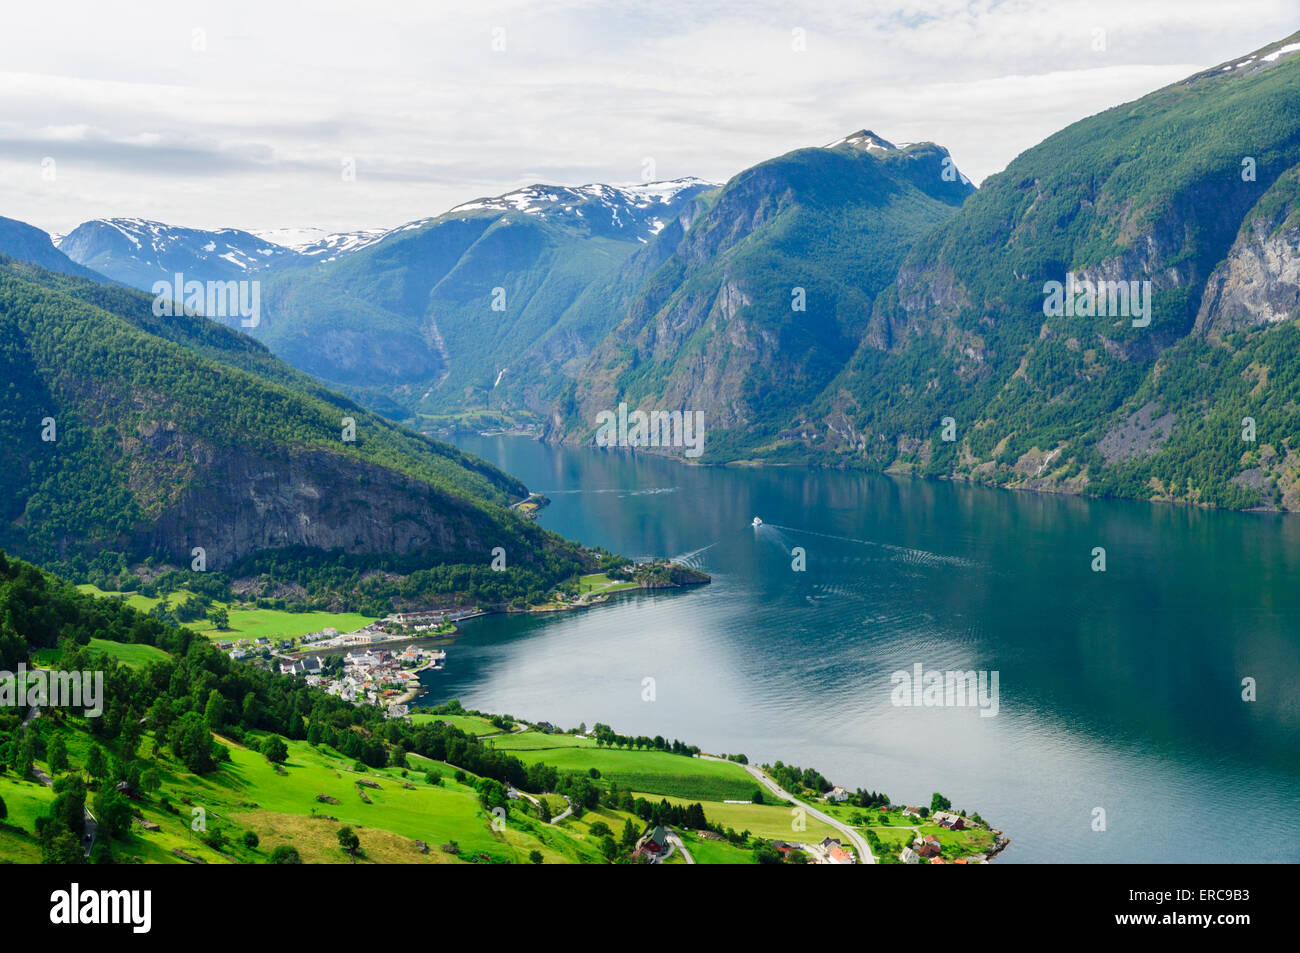 Summer view at Aurland town on the shore of Aurlandsfjord, Norway Stock Photo